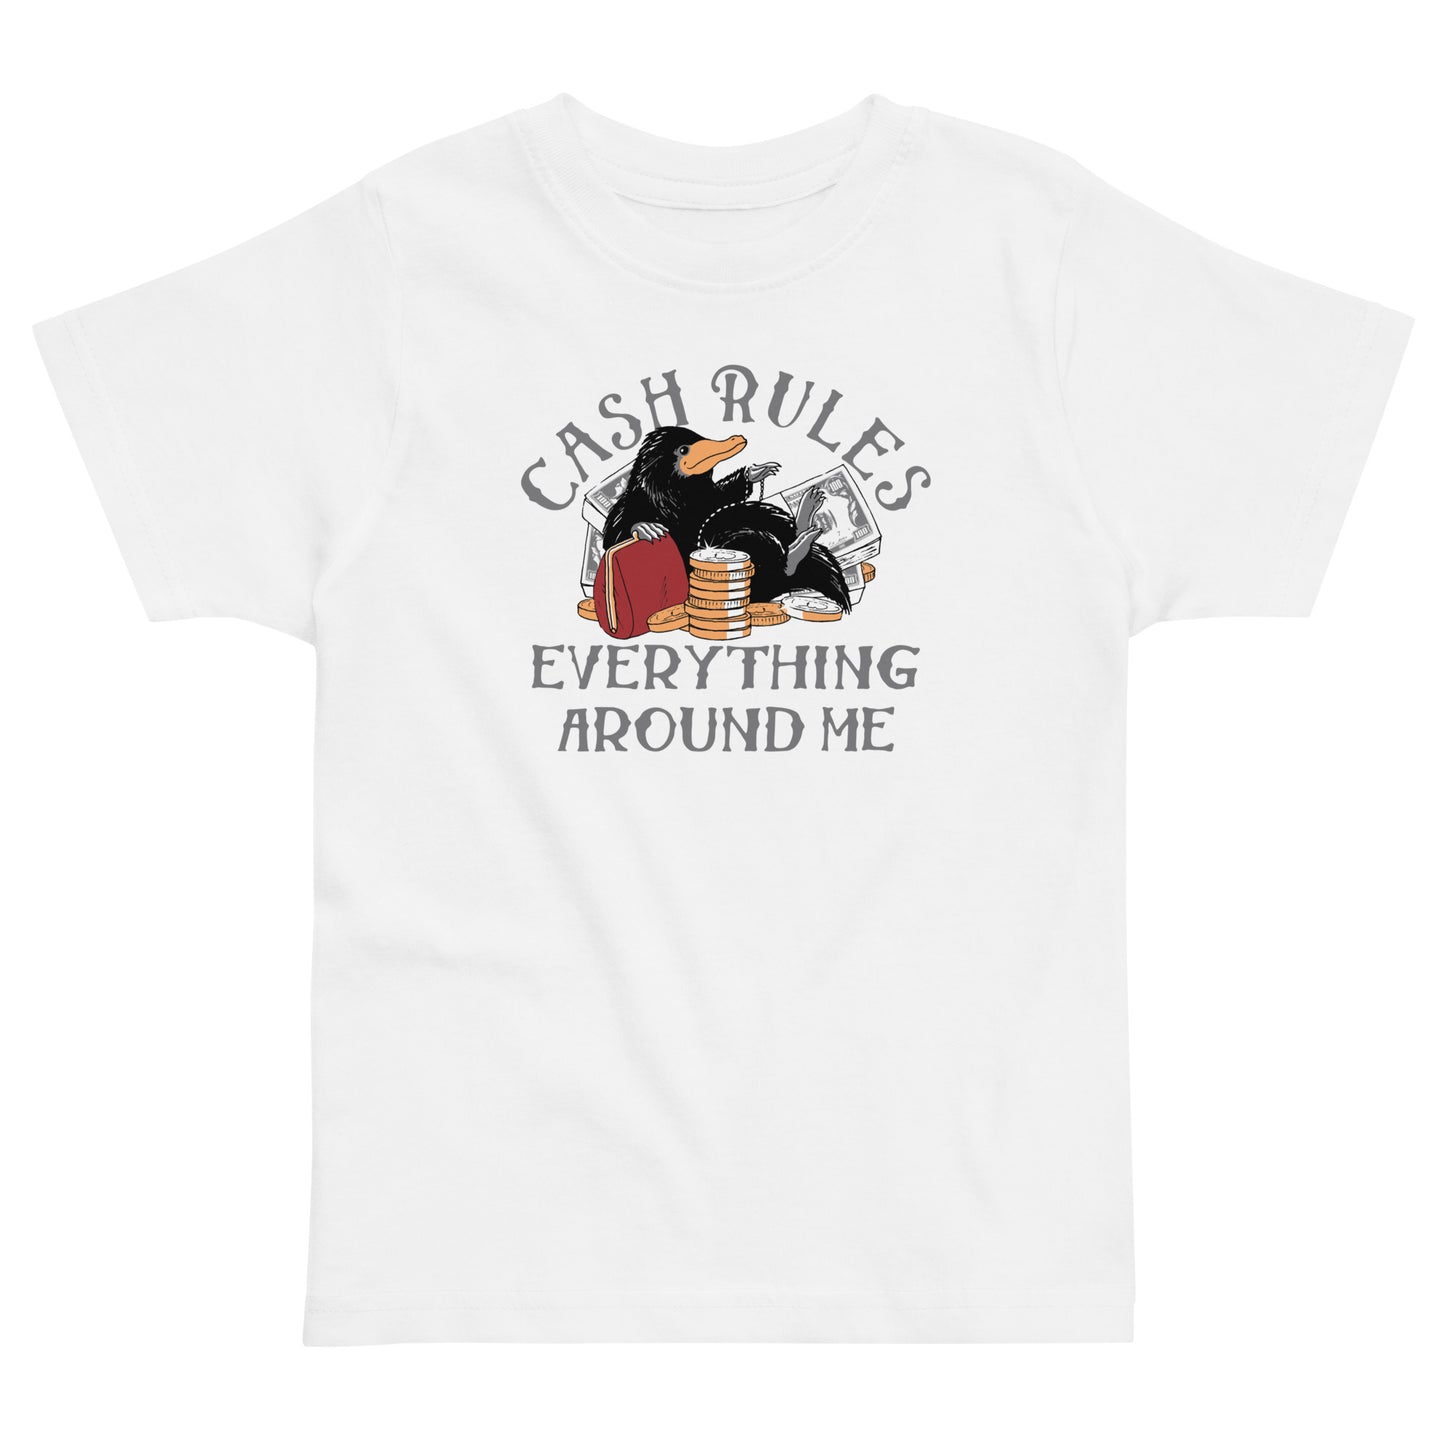 Cash Rules Everything Around Me Kid's Toddler Tee